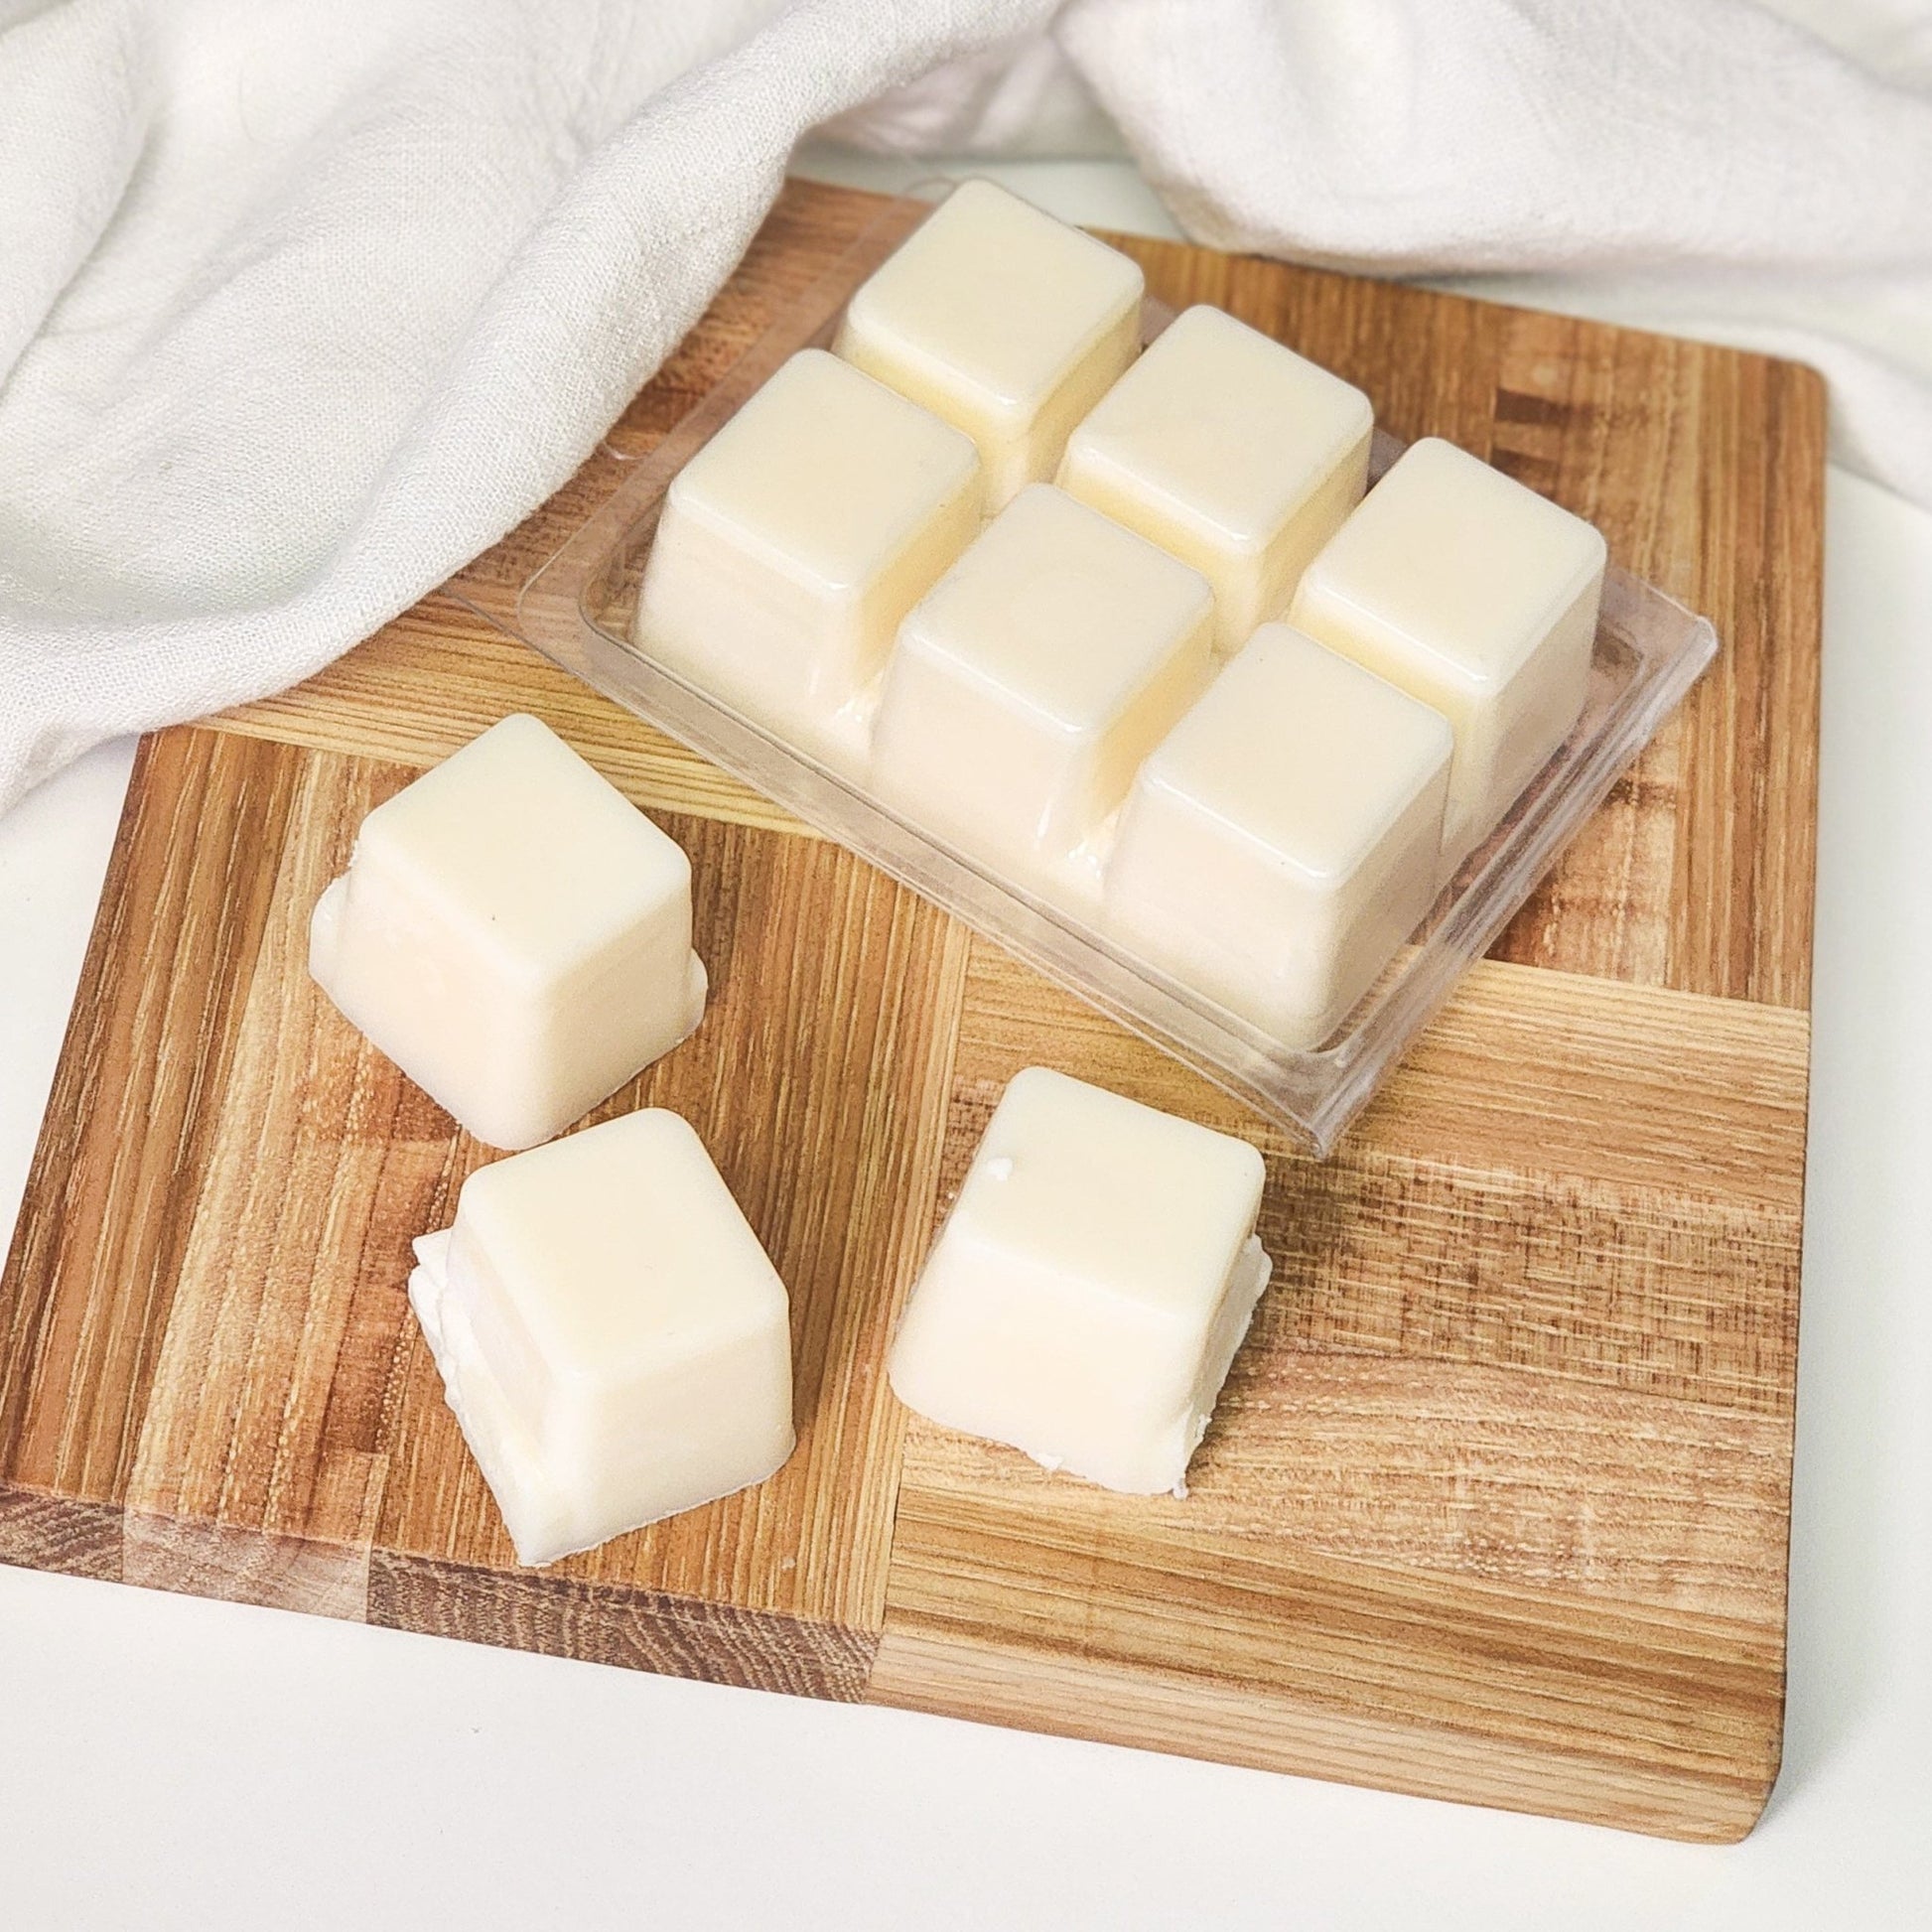 Jasmine and Sandalwood Soy Wax Melts - Abboo Candle Co